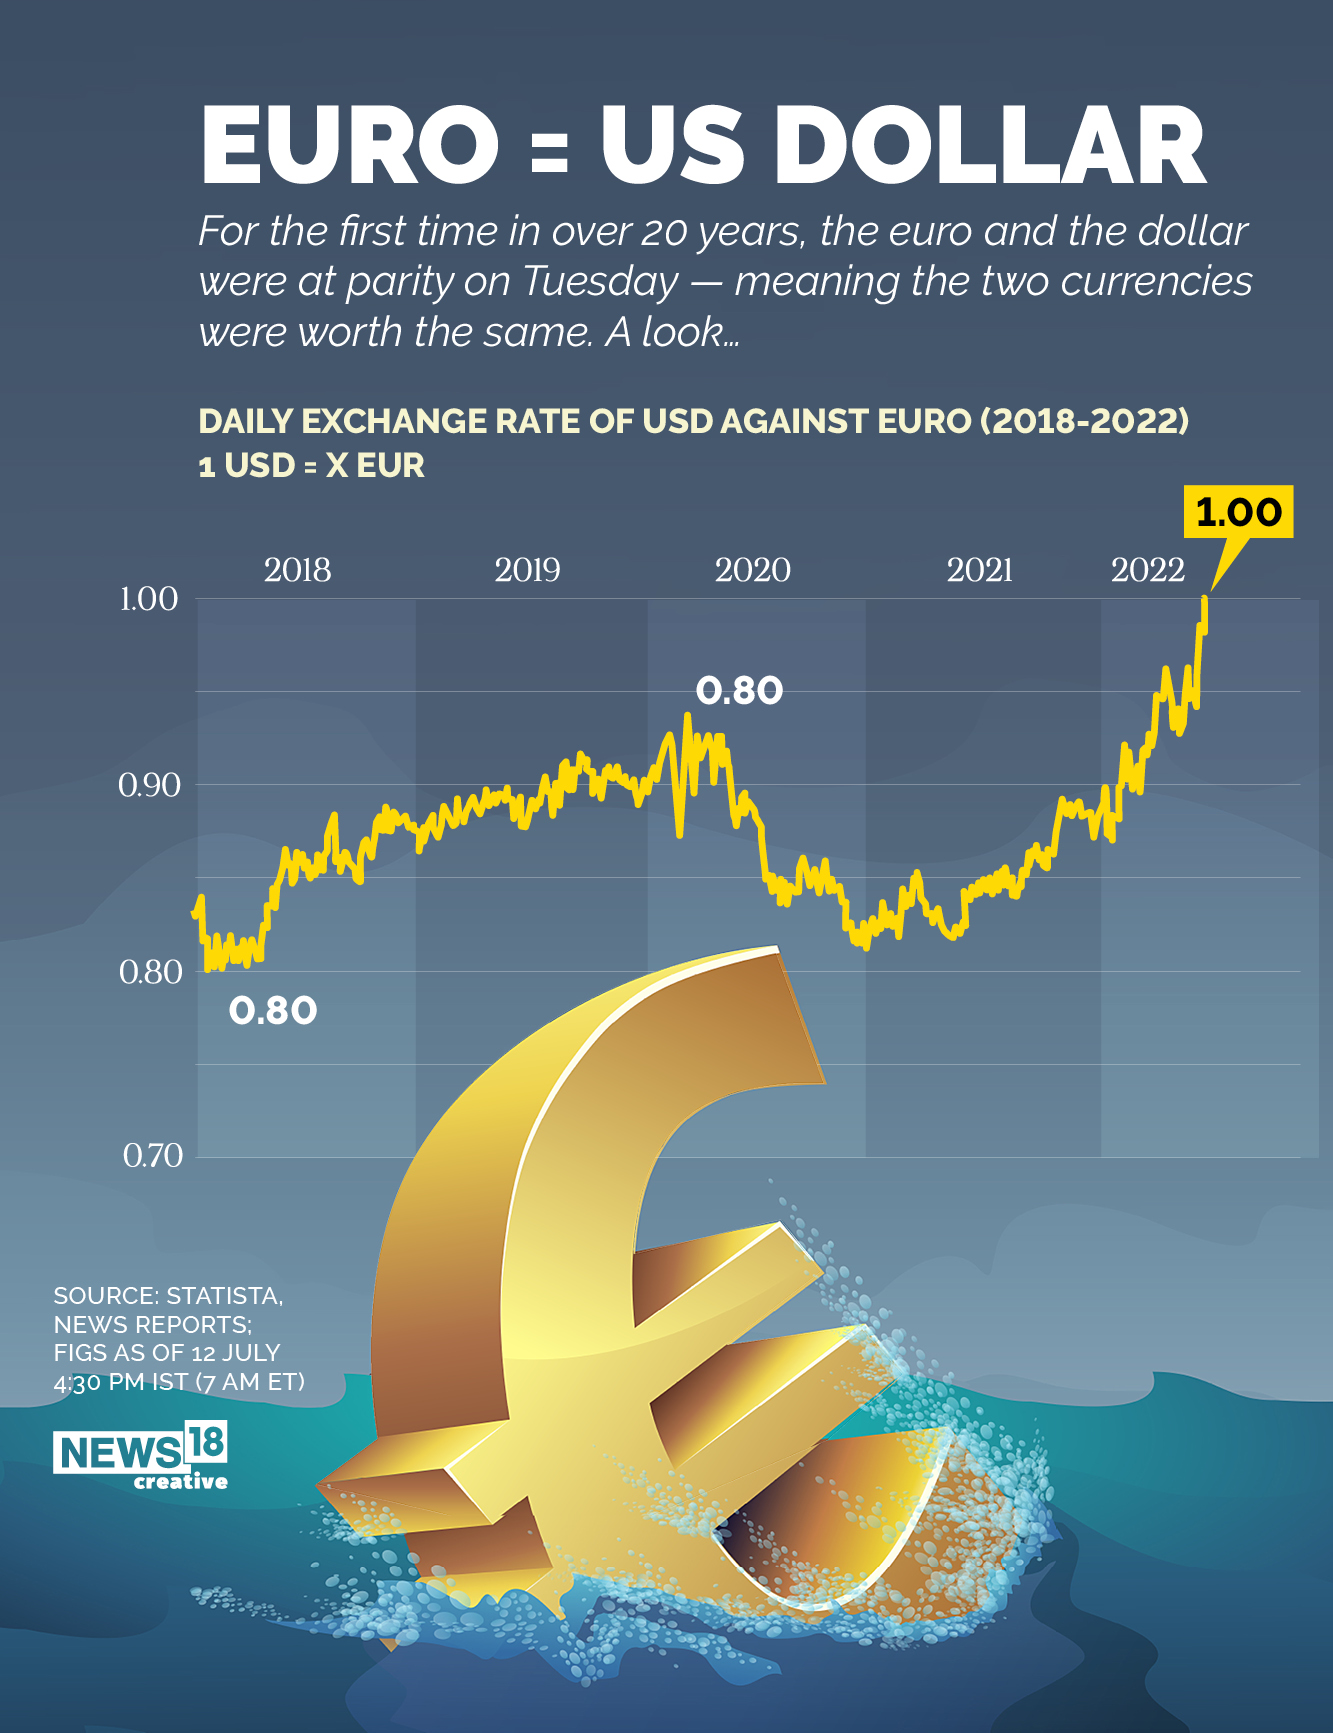 Euro dips below <img.00 for first time since end-2002